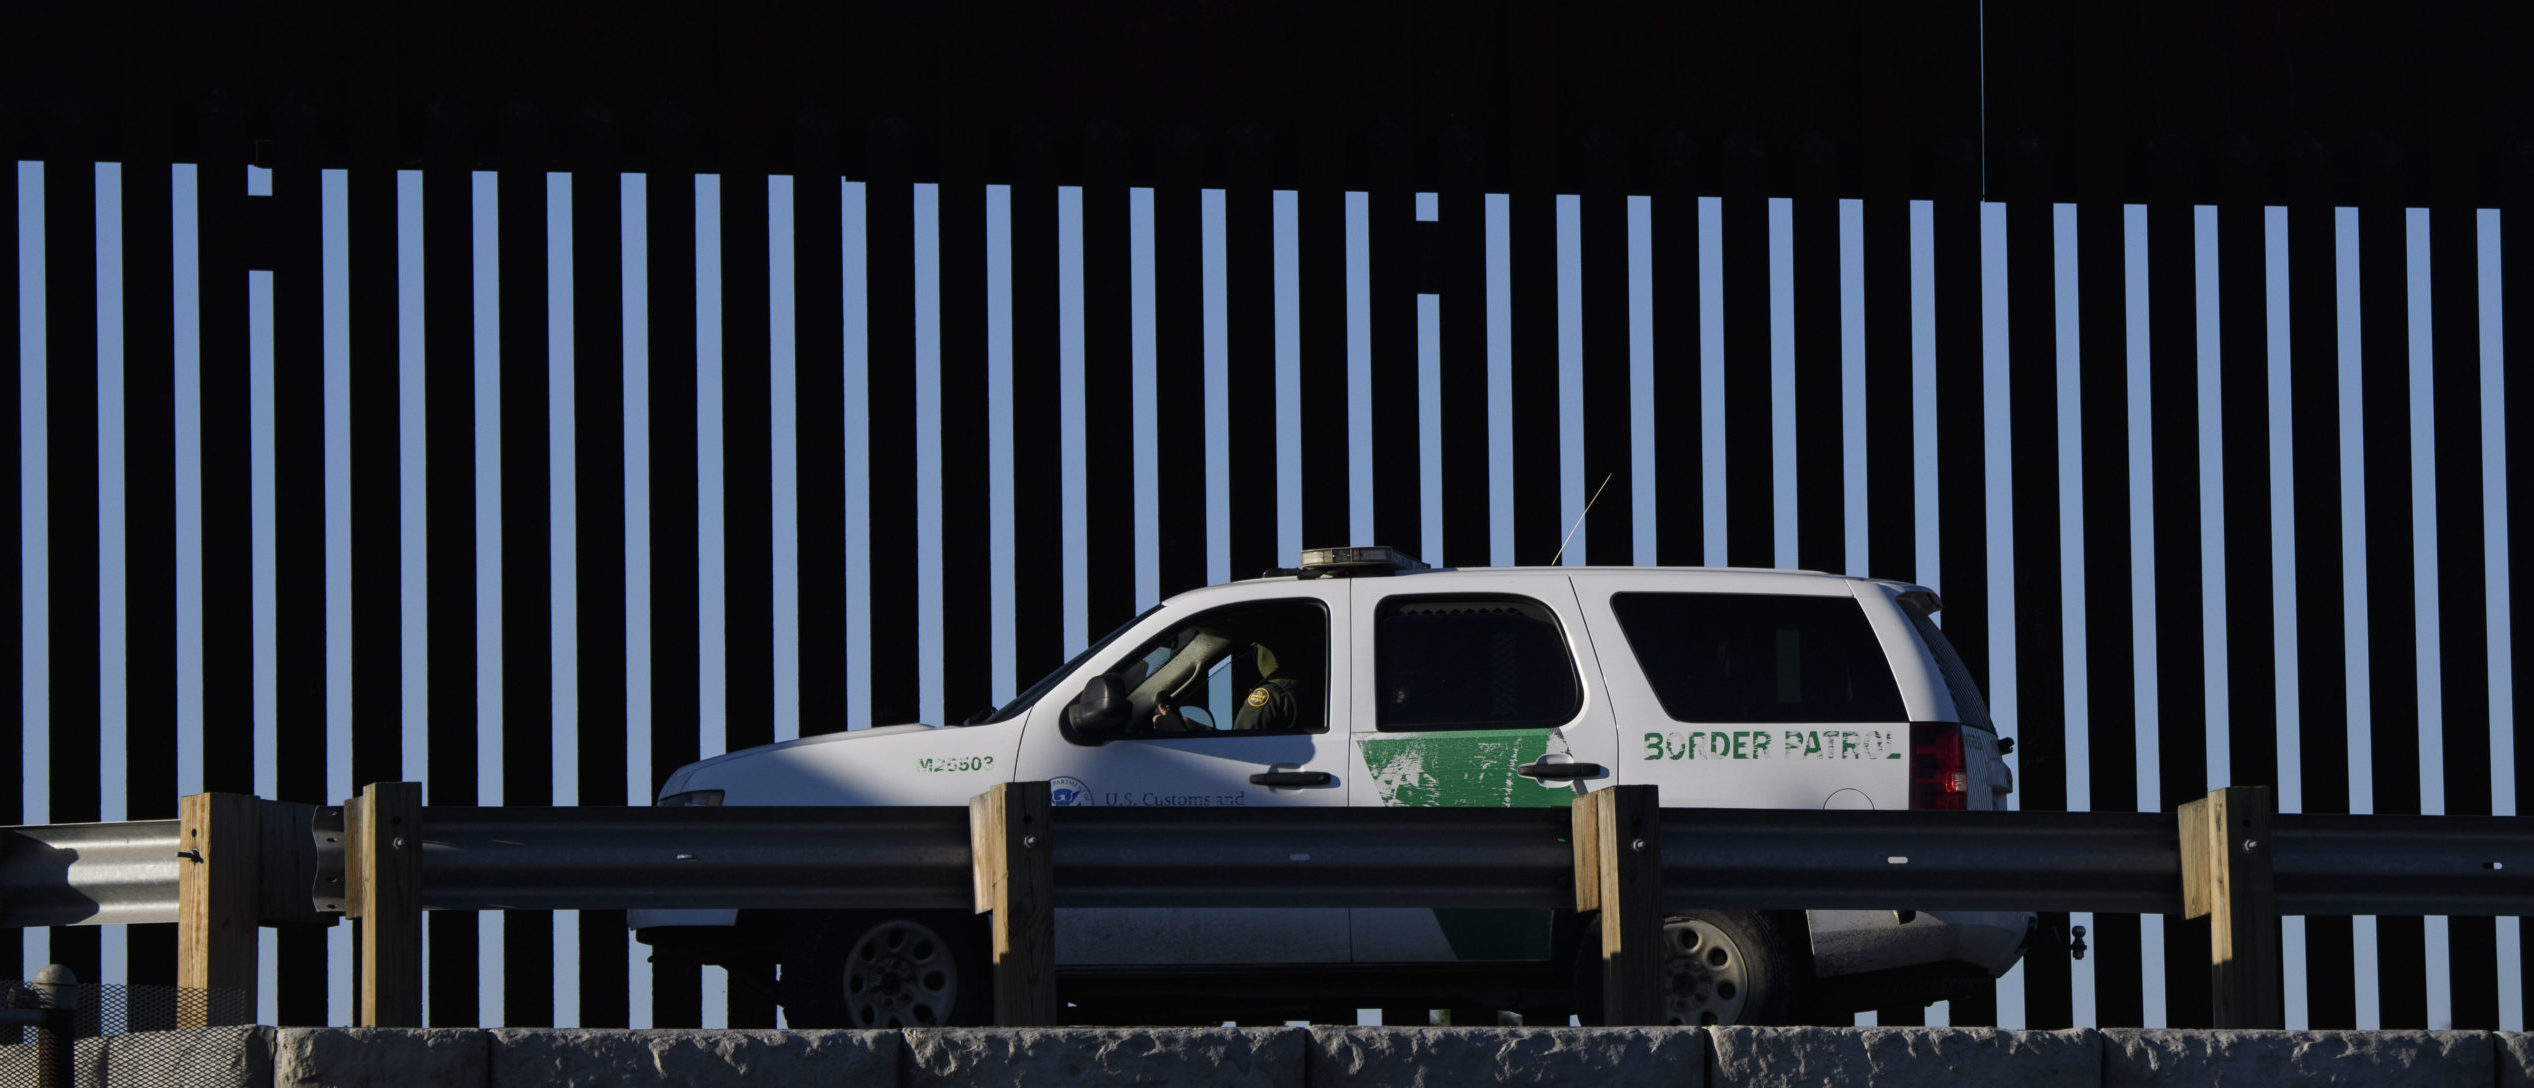 A US Border Patrol agent sits in a vehicle along a border wall near the US Customs and Border Protection (CBP) San Ysidro Port of Entry at the US Mexico border on February 19, 2021 in San Diego, California. - The Biden administration plans to slowly allow 25,000 people with active cases seeking asylum into the US previously enrolled in the Migrant Protection Protocols program, known as "Remain in Mexico," with community organizations testing for Covid-19 and providing hotels to quarantine migrants upon arrival during the pandemic. (Photo by Patrick T. FALLON / AFP) (Photo by PATRICK T. FALLON/AFP via Getty Images)